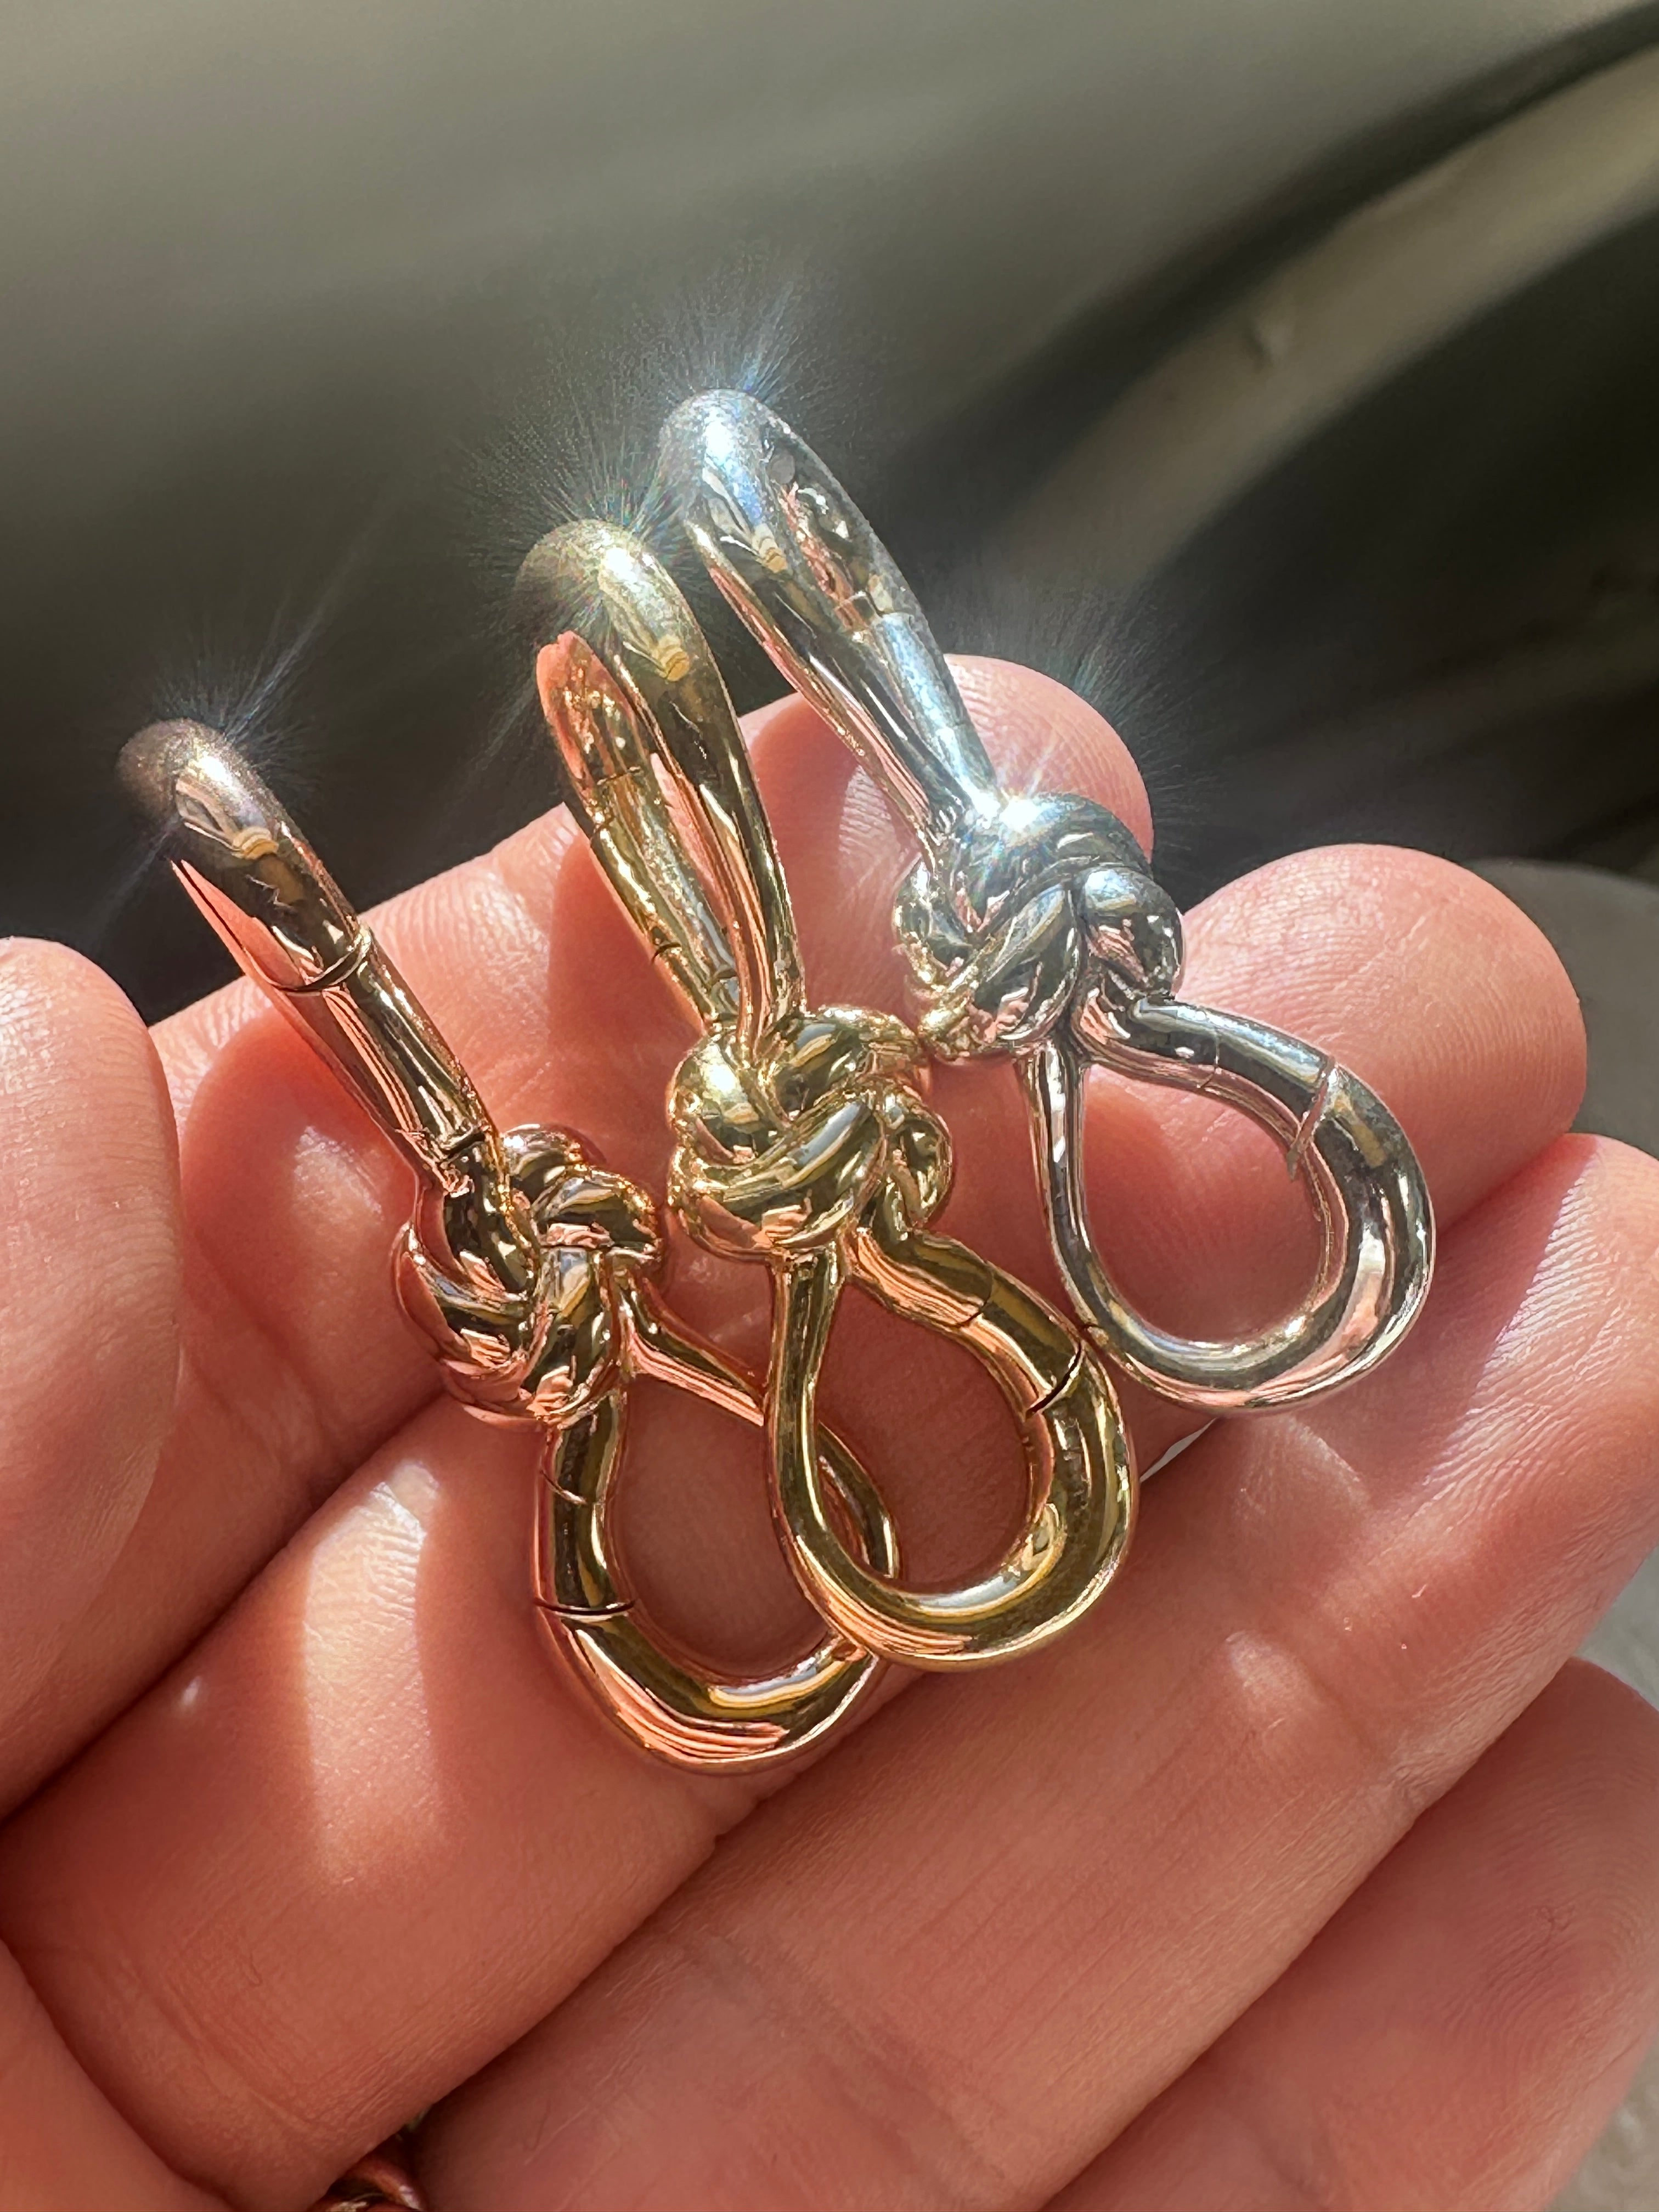 Close up shot of yellow gold, rose gold, and silver knot lock charms in the palm of hand with sunlight shining on them